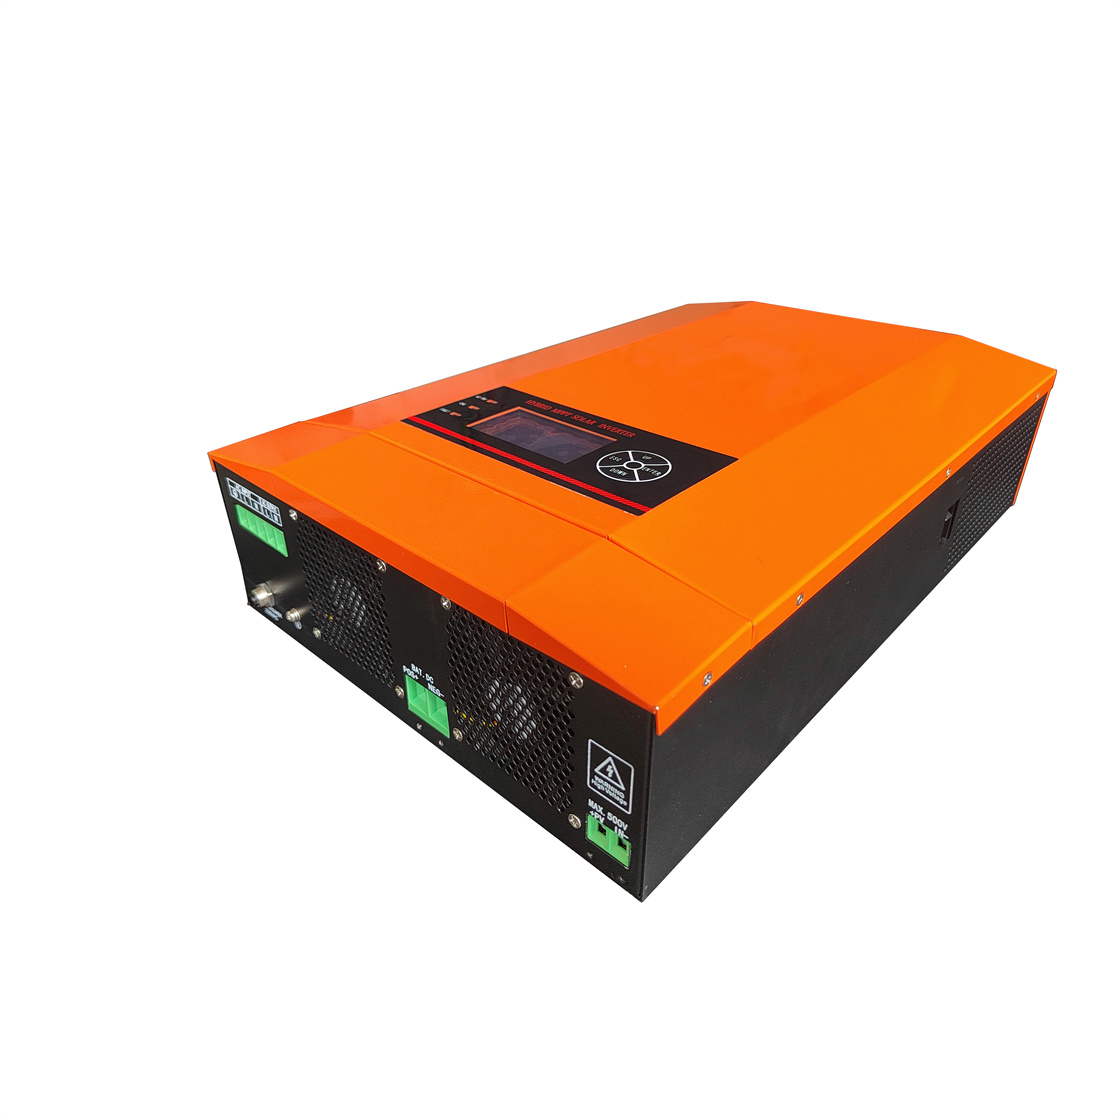 MPPT 5500w solar energy hybrid high frequency pure sine wave inverter and charger with WIFI Monitor for wild camping